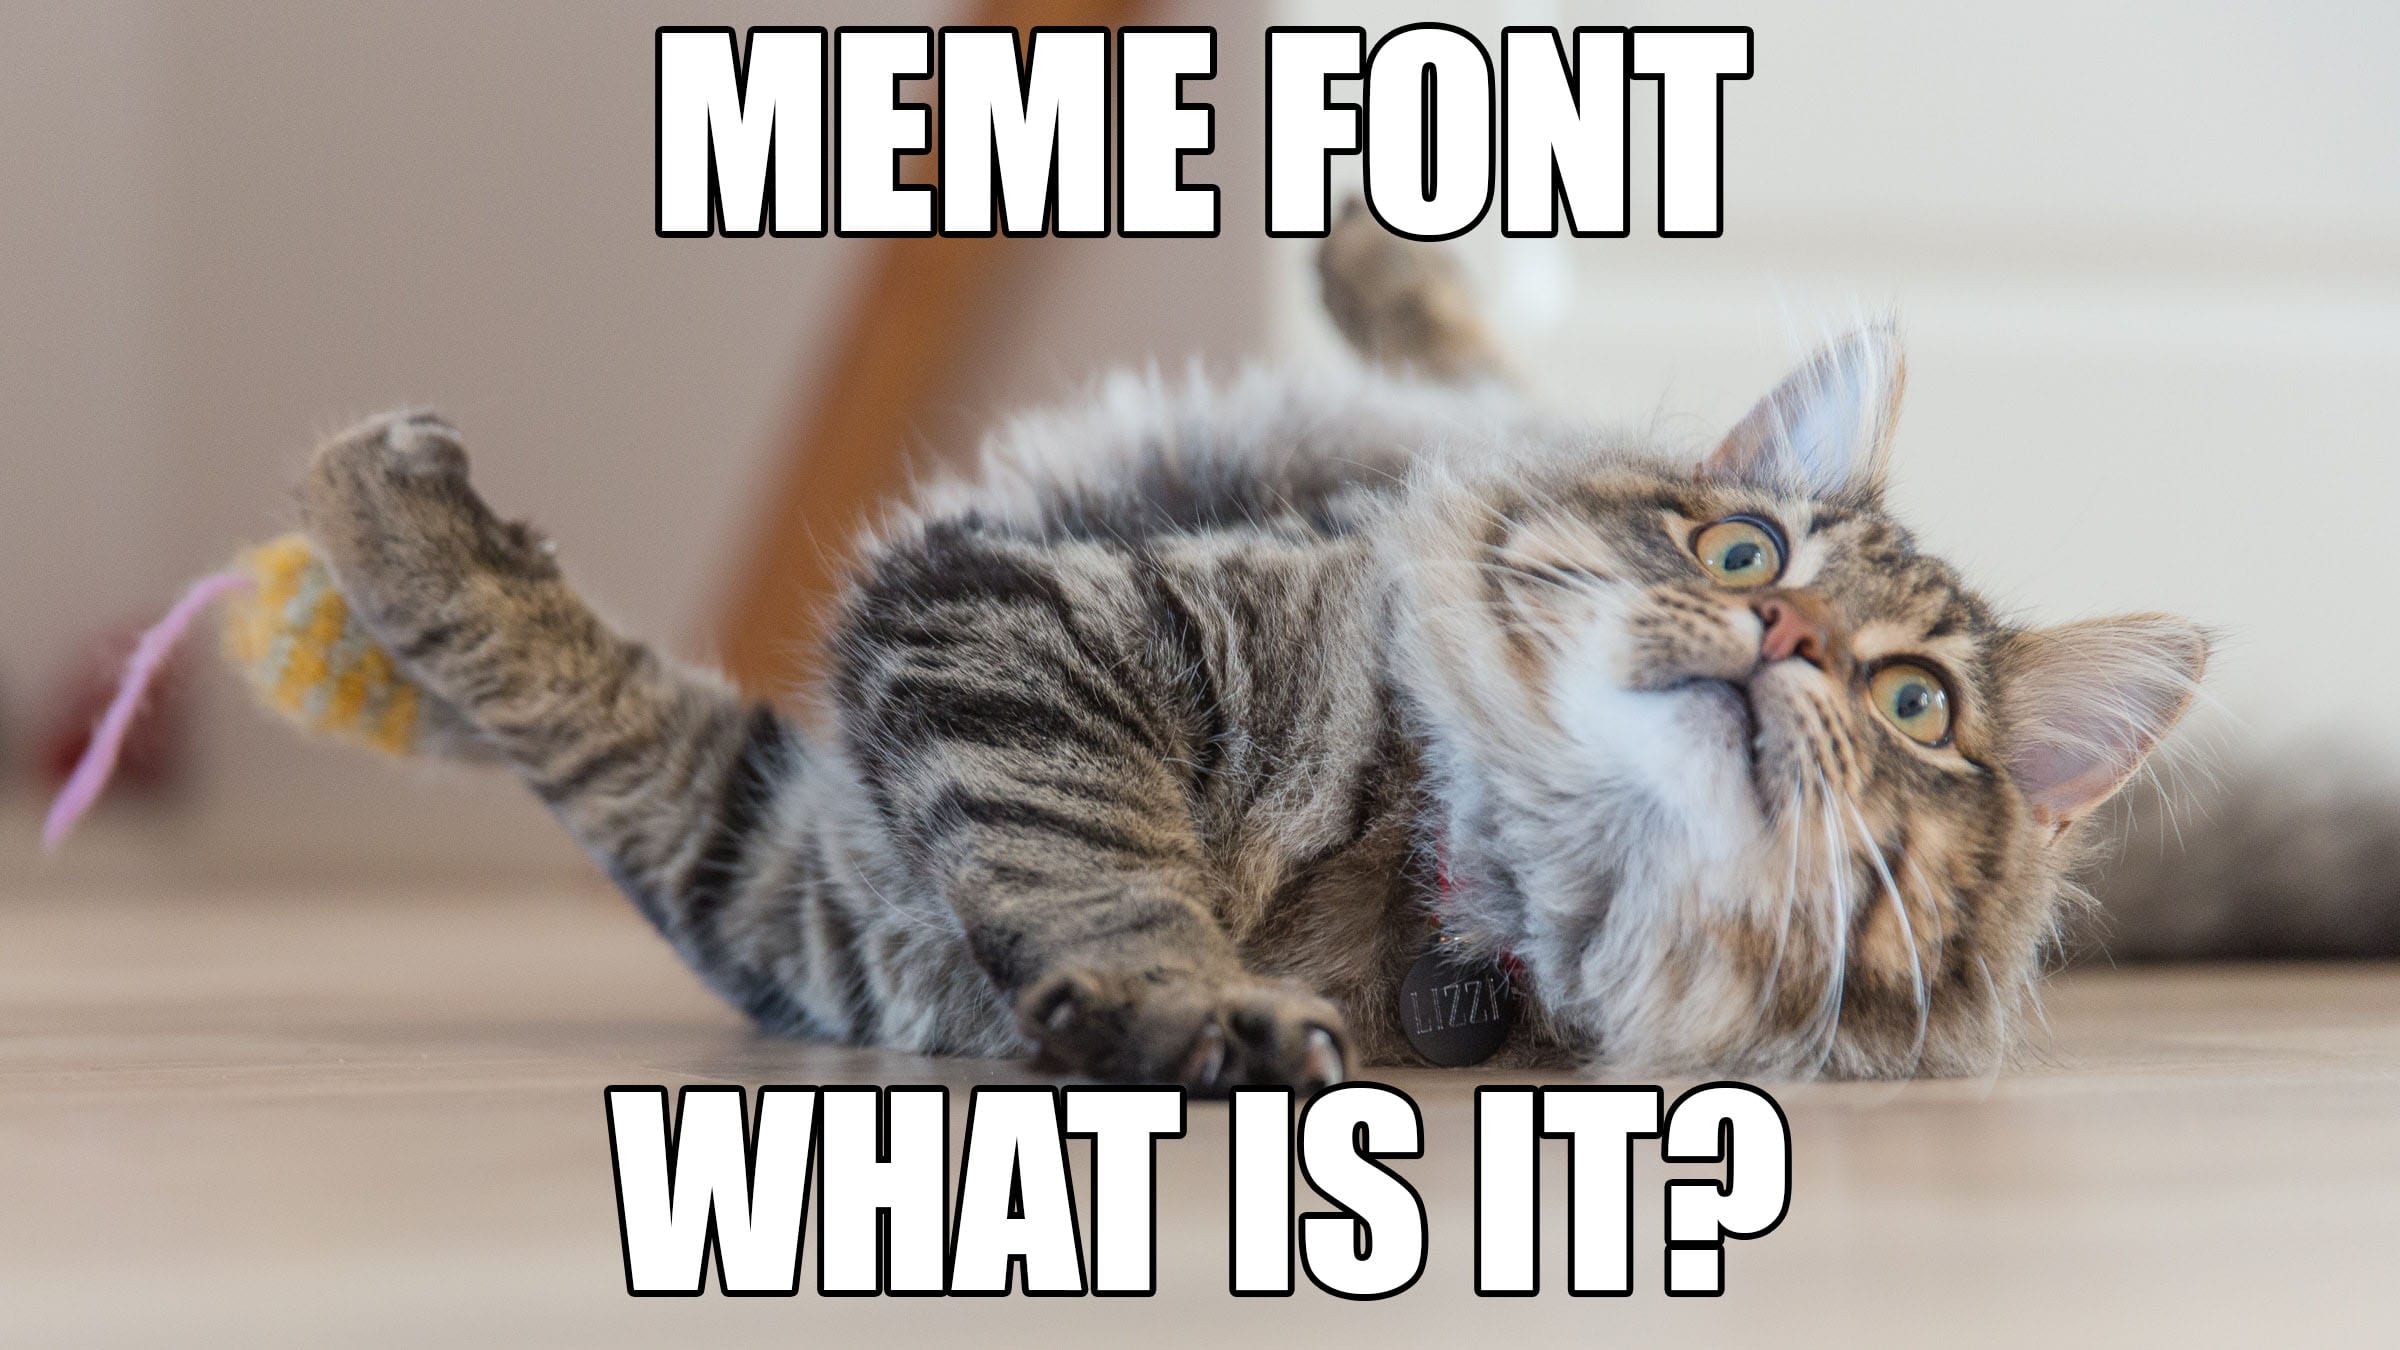 Meme Font - What Is It and Why Do We Use It? - London Grey